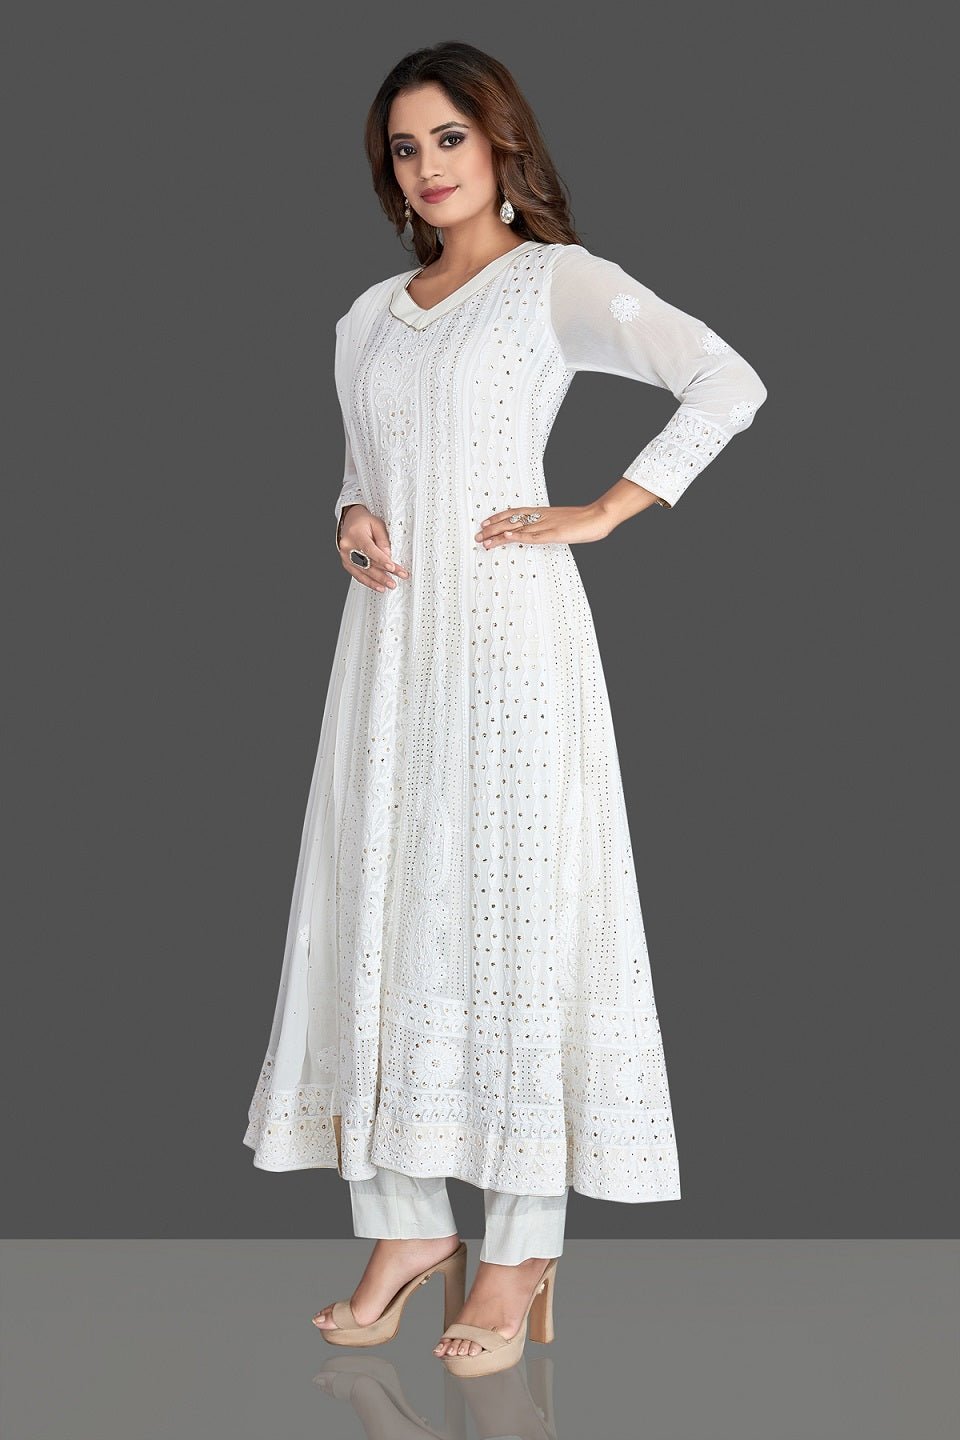 Shop beautiful white Lucknowi chikankari work georgette Anarkali suit online in USA. Flaunt your sartorial choice with beautiful embroidered Anarkali, sharara suits, designer lehengas, designer gowns from Pure Elegance Indian saree store in USA.-full view